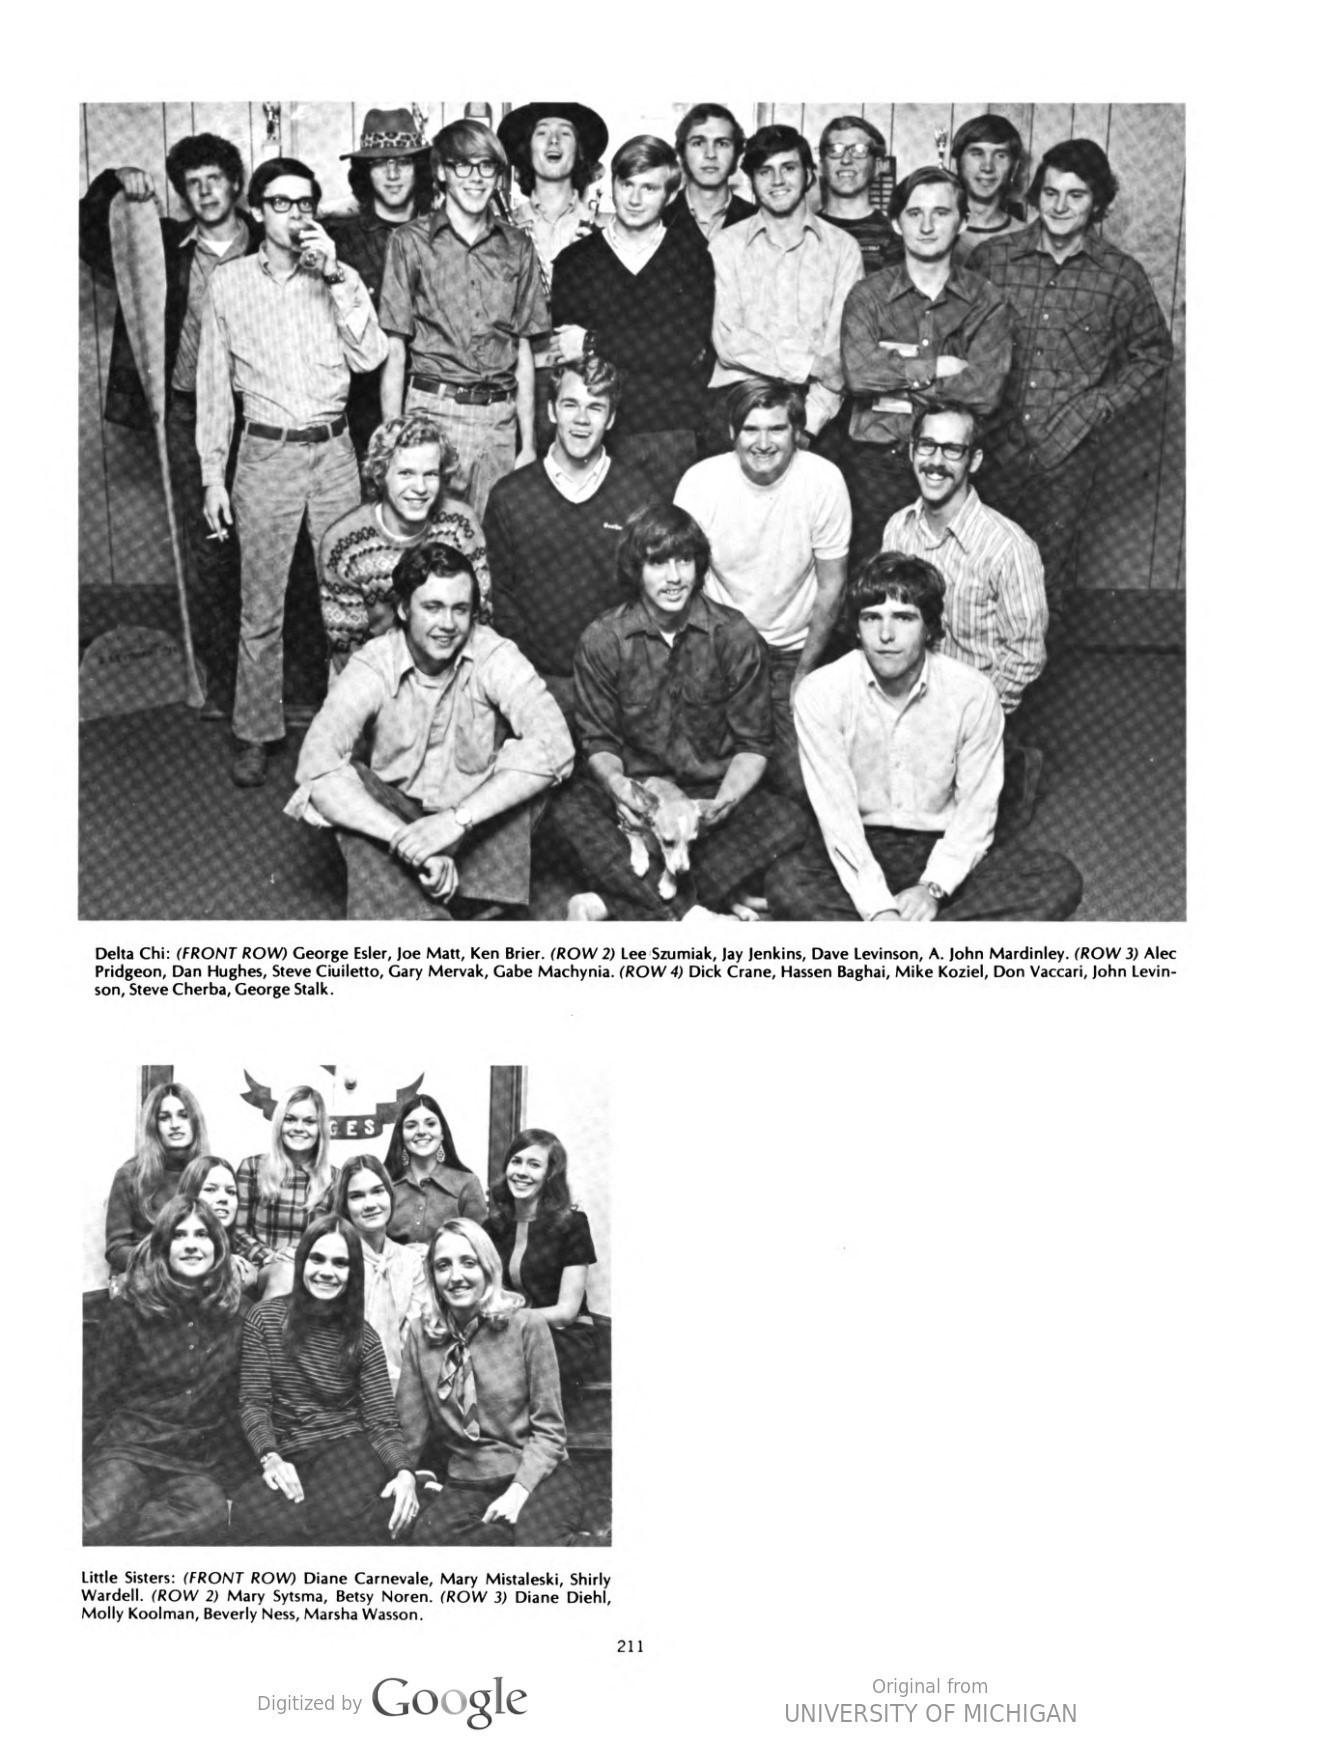 THE MICHIGANENSIAN SERIES: FEATURING 1972 AND 1981